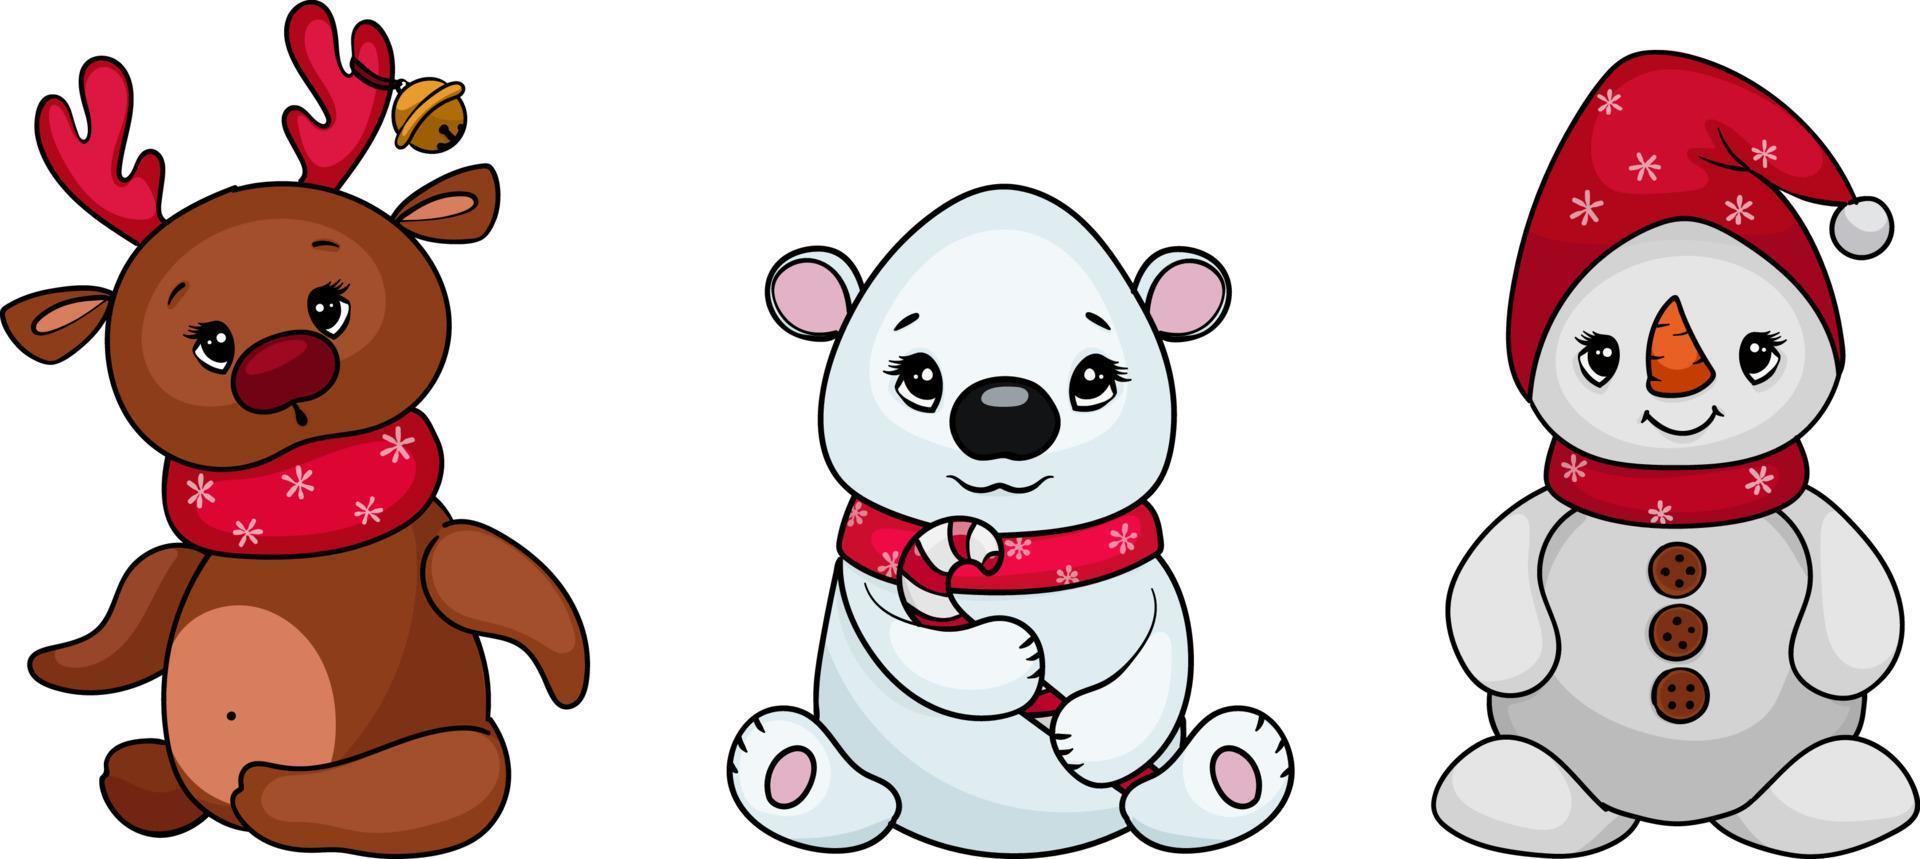 Cute Christmas characters - fawn, snowman, white bear. Vector illustration in cartoon style